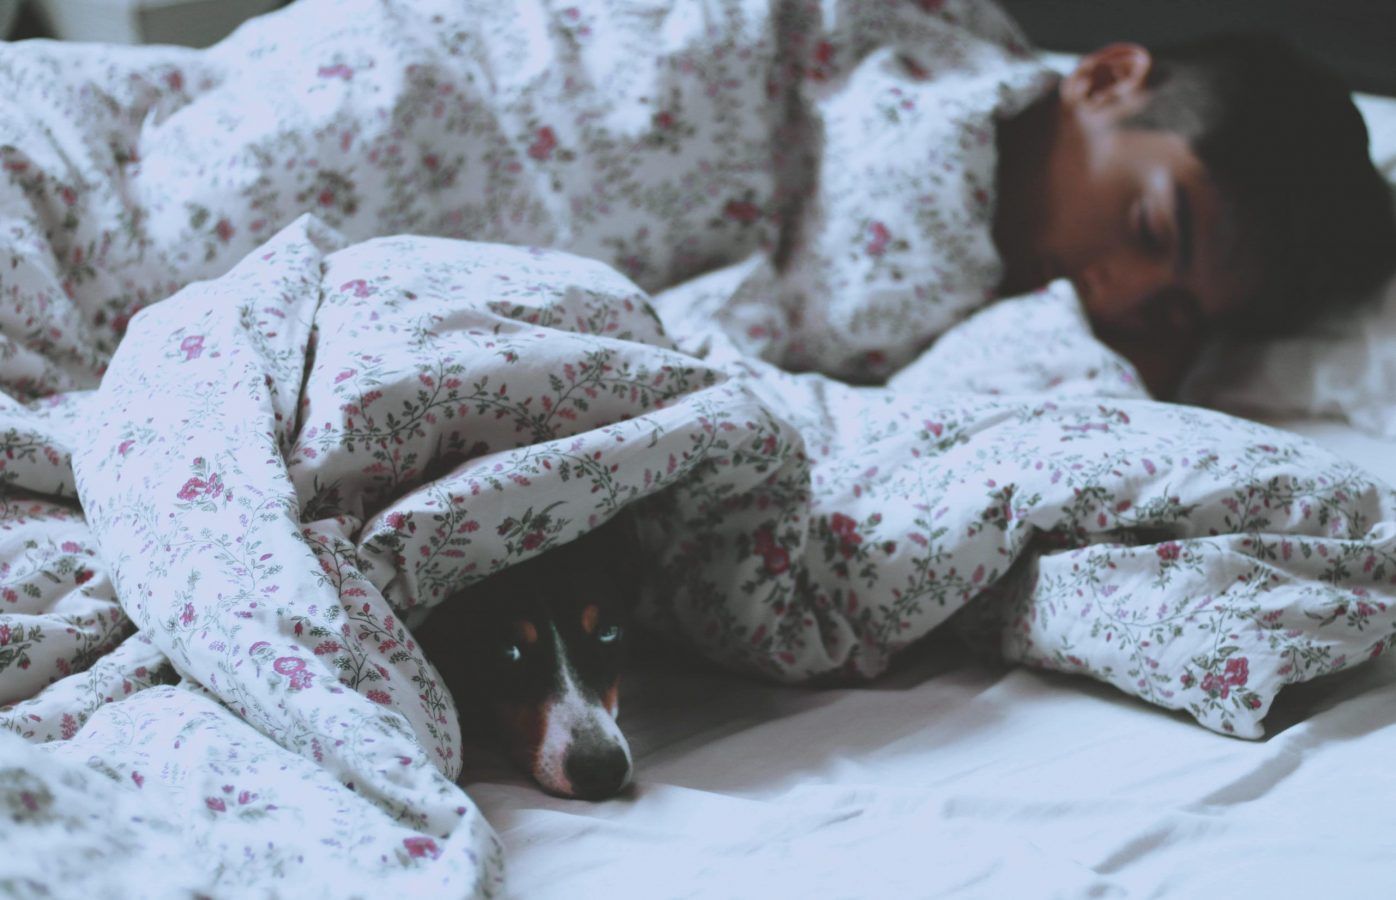 How to treat insomnia and tips to get some peaceful sleep